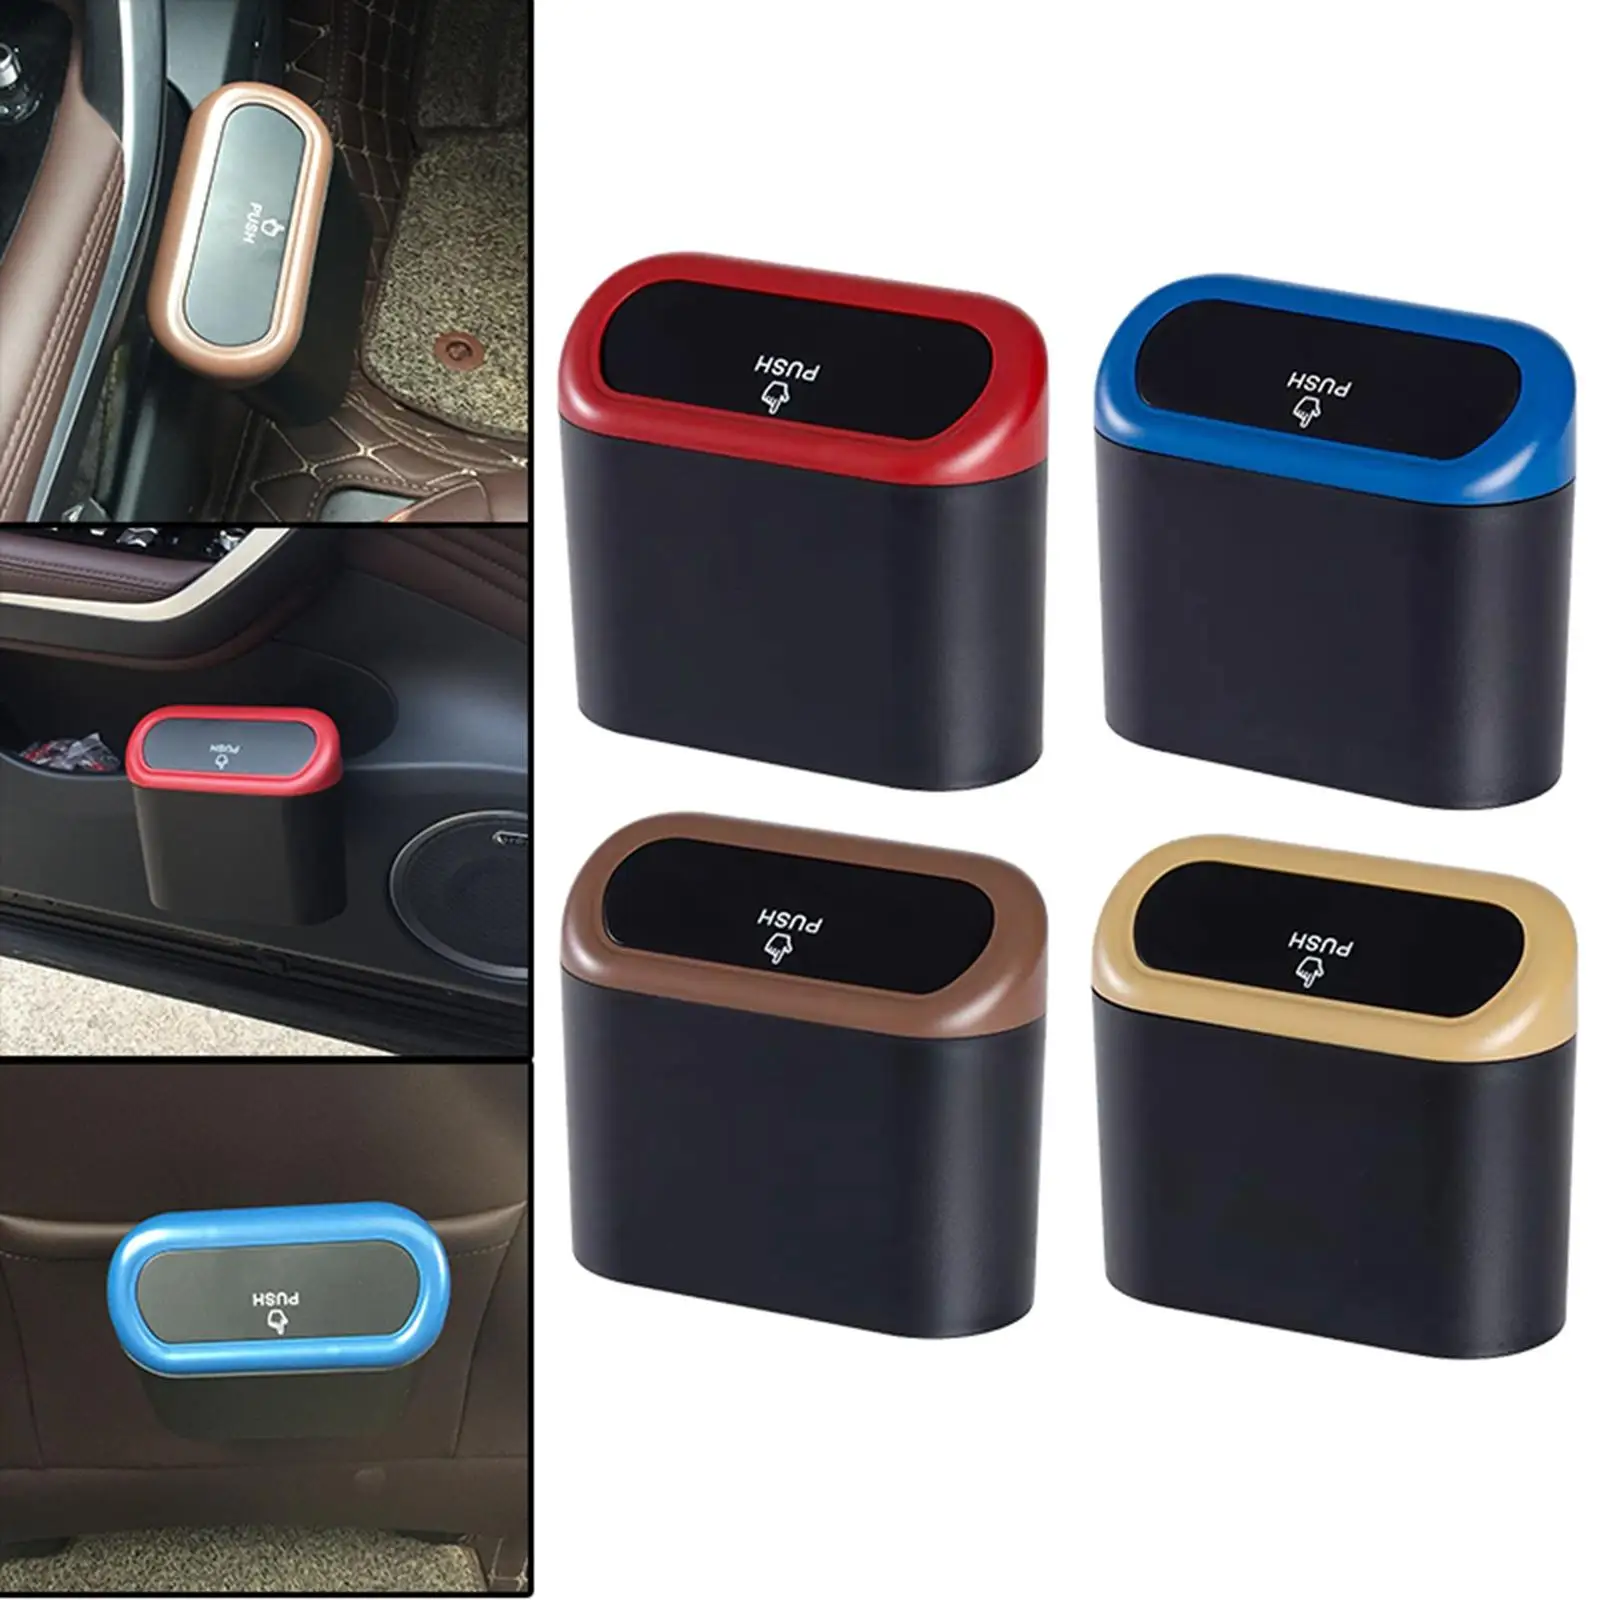 Mini Car Trash Can with Lid Trash Container Pressing Trash Bin for Home Office Long Journey Van Trash Holder Rubbish Bins